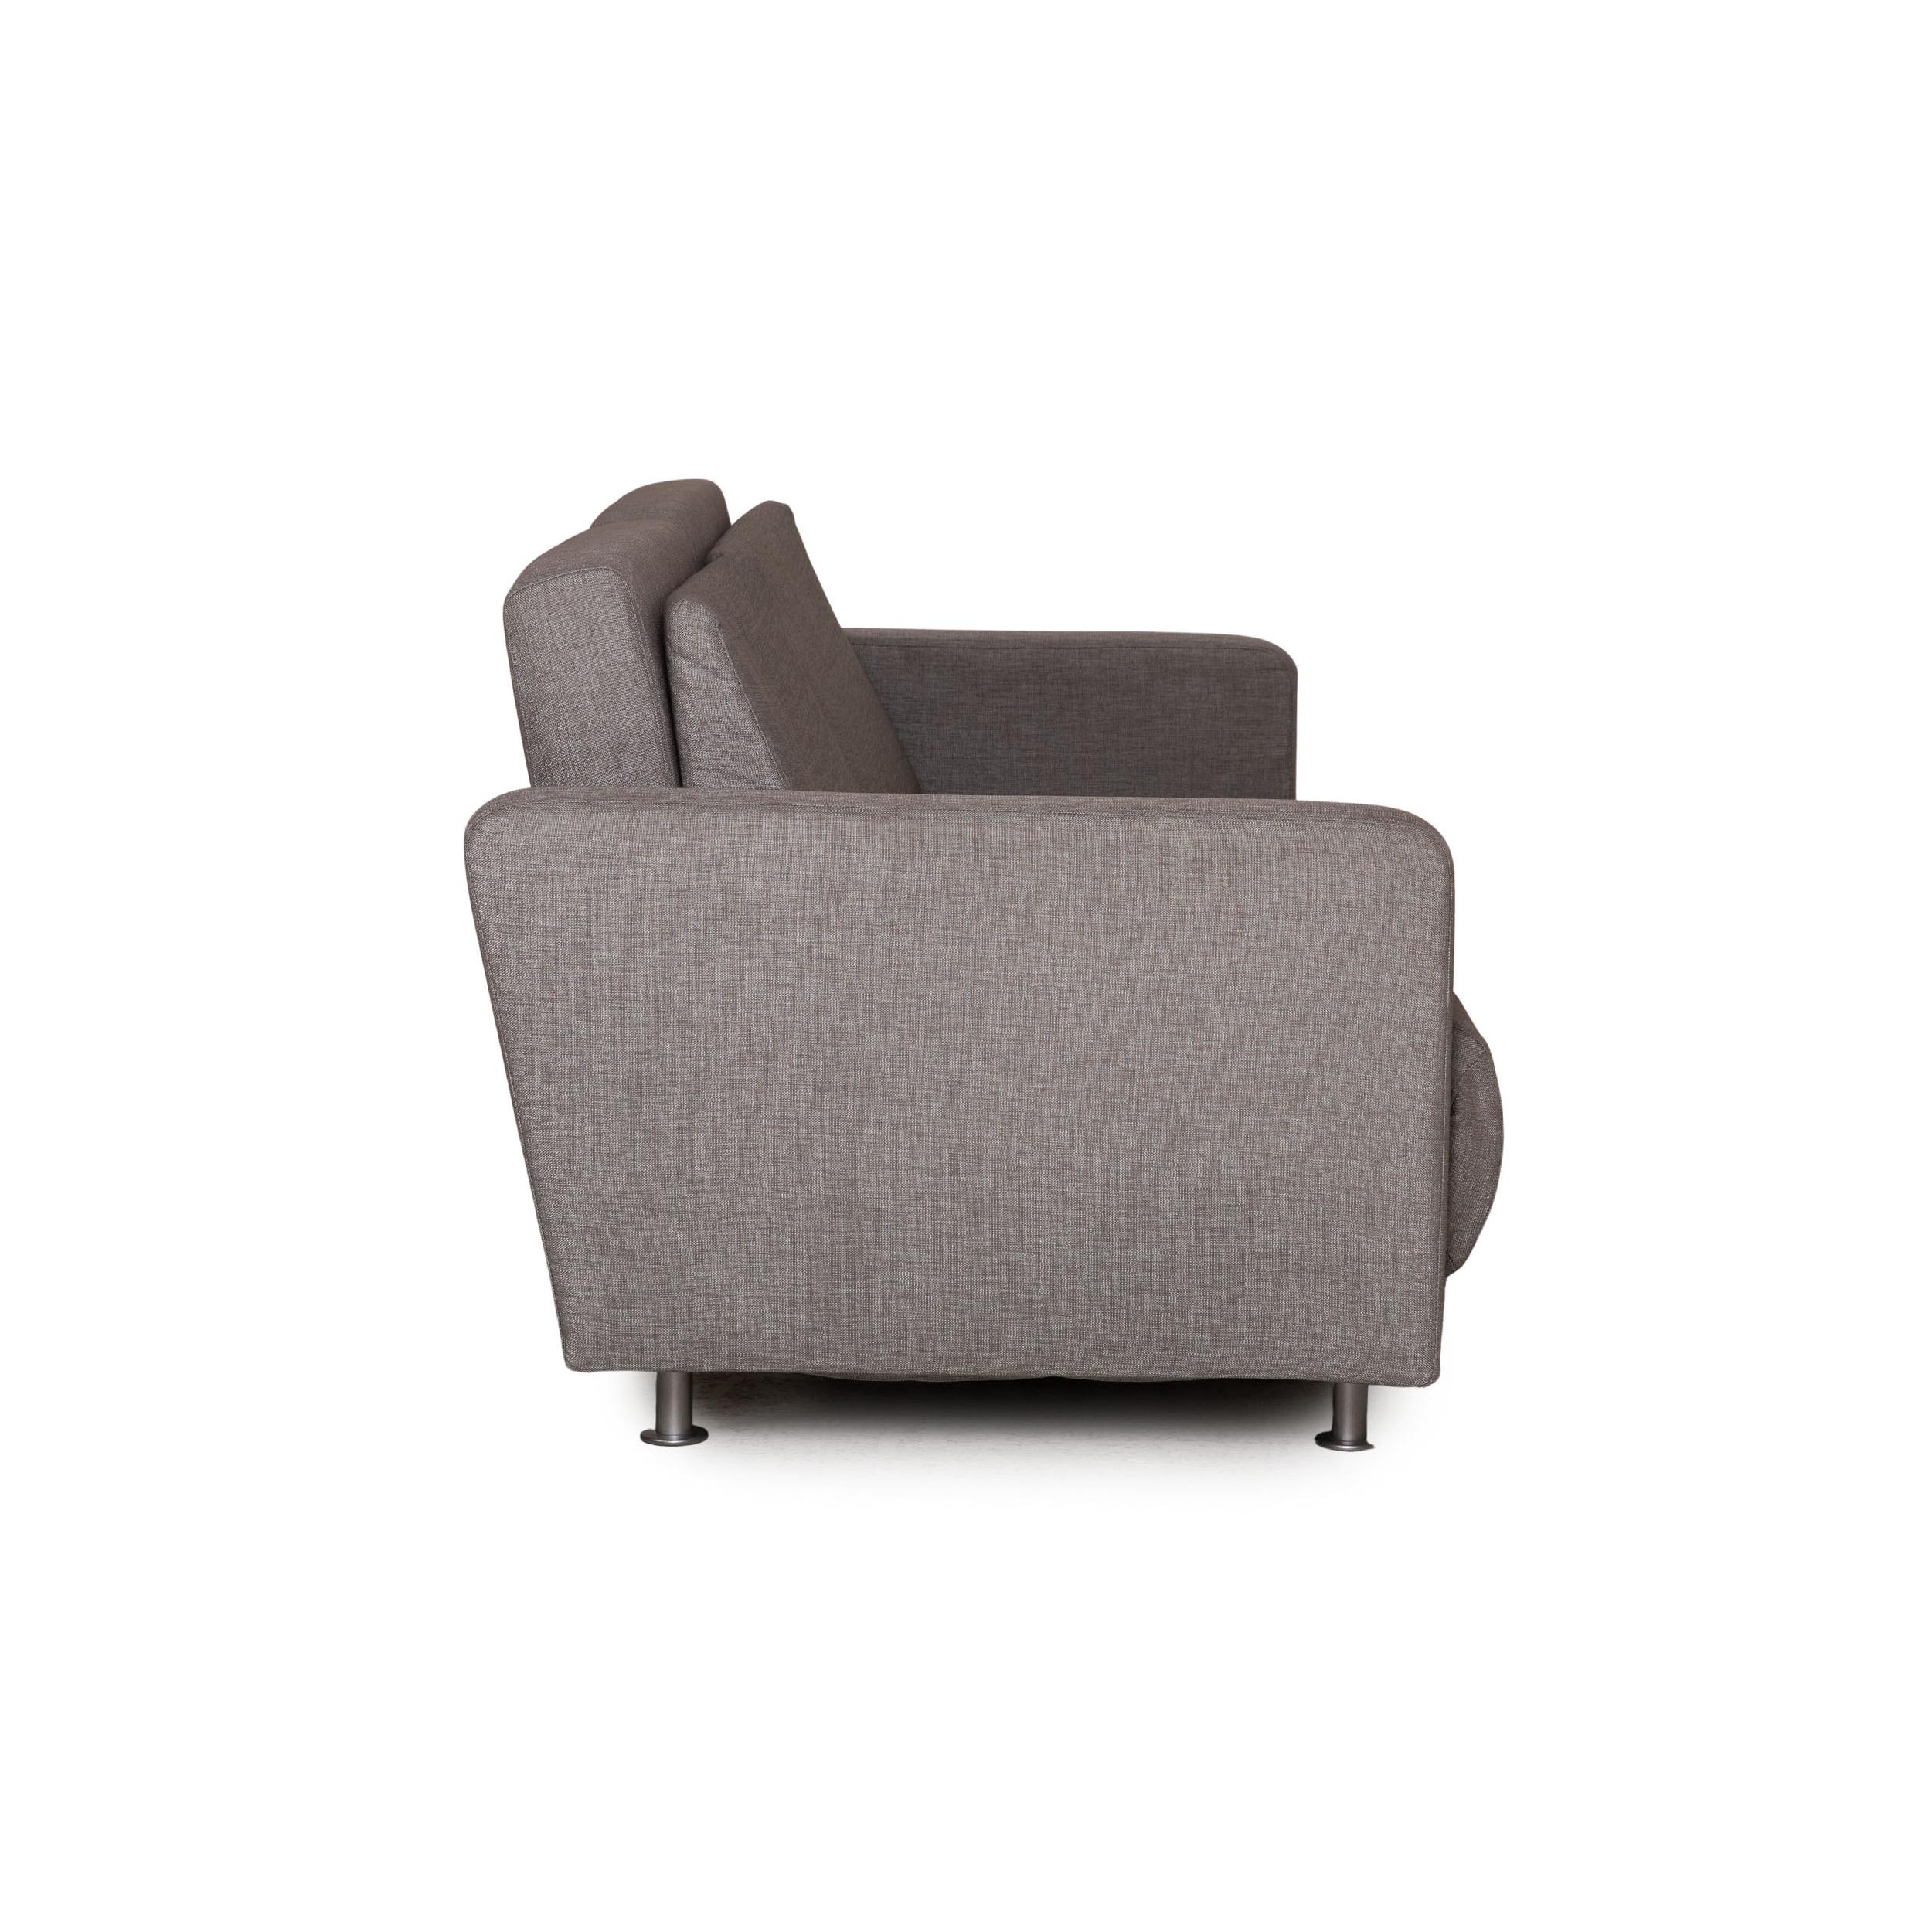 BoConcept Melo Sofa Fabric Gray Two-Seater Couch Function Sleeping Function 4